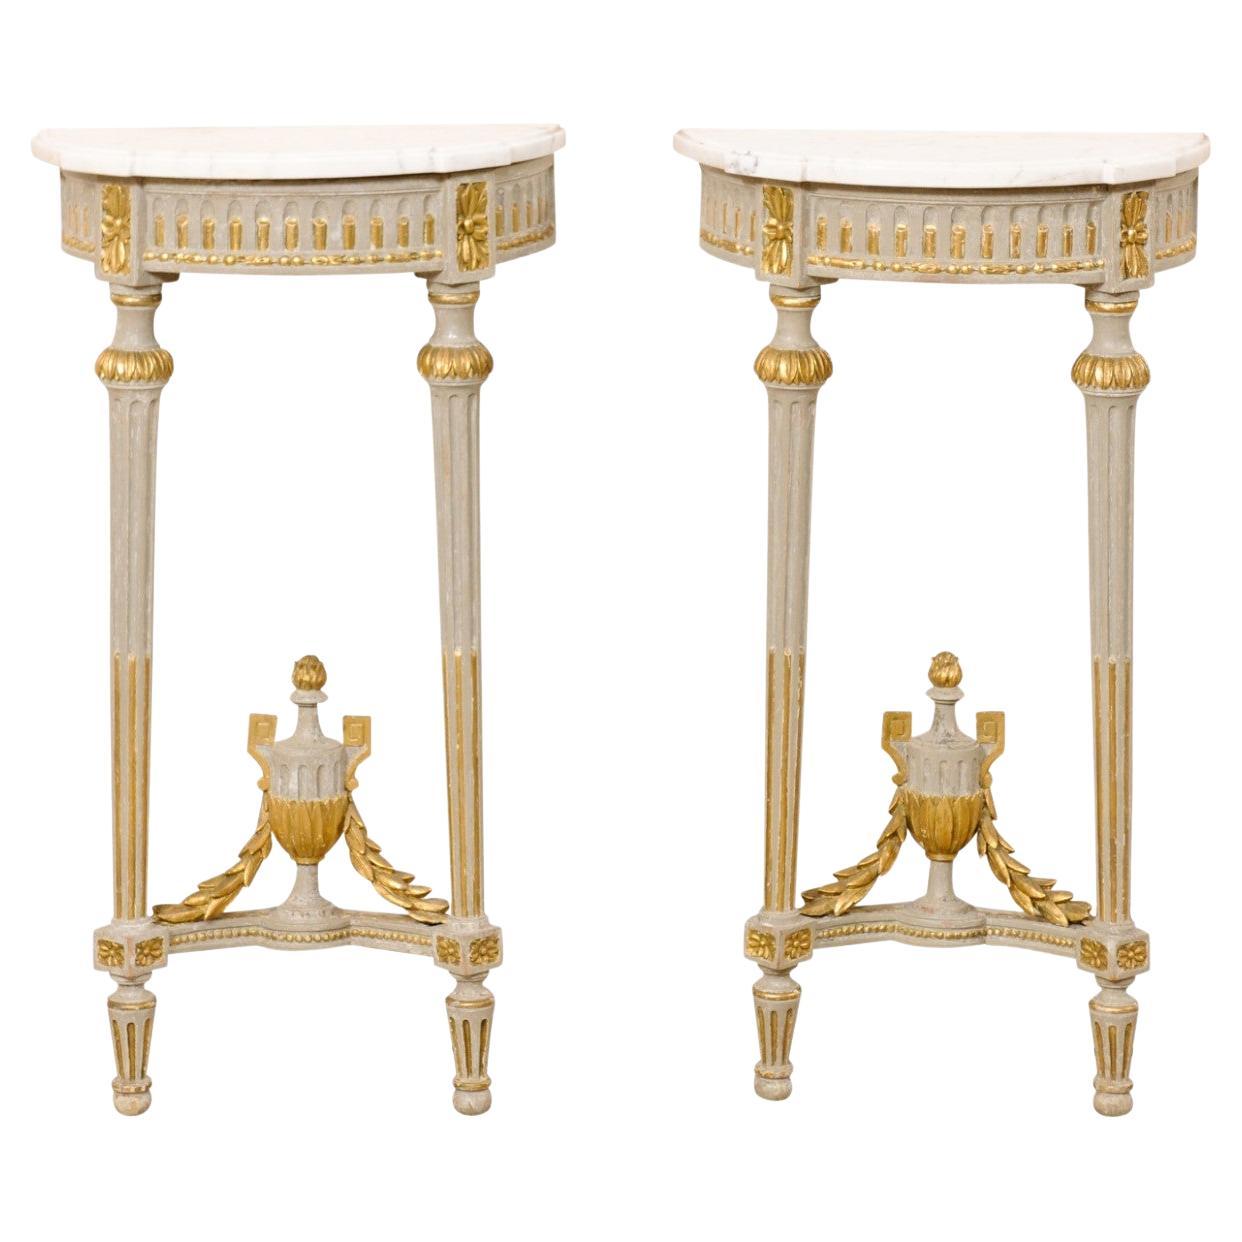 Early 19th C. French Petite Neoclassic Carved & Marble Top Wall-Mounted Consoles For Sale